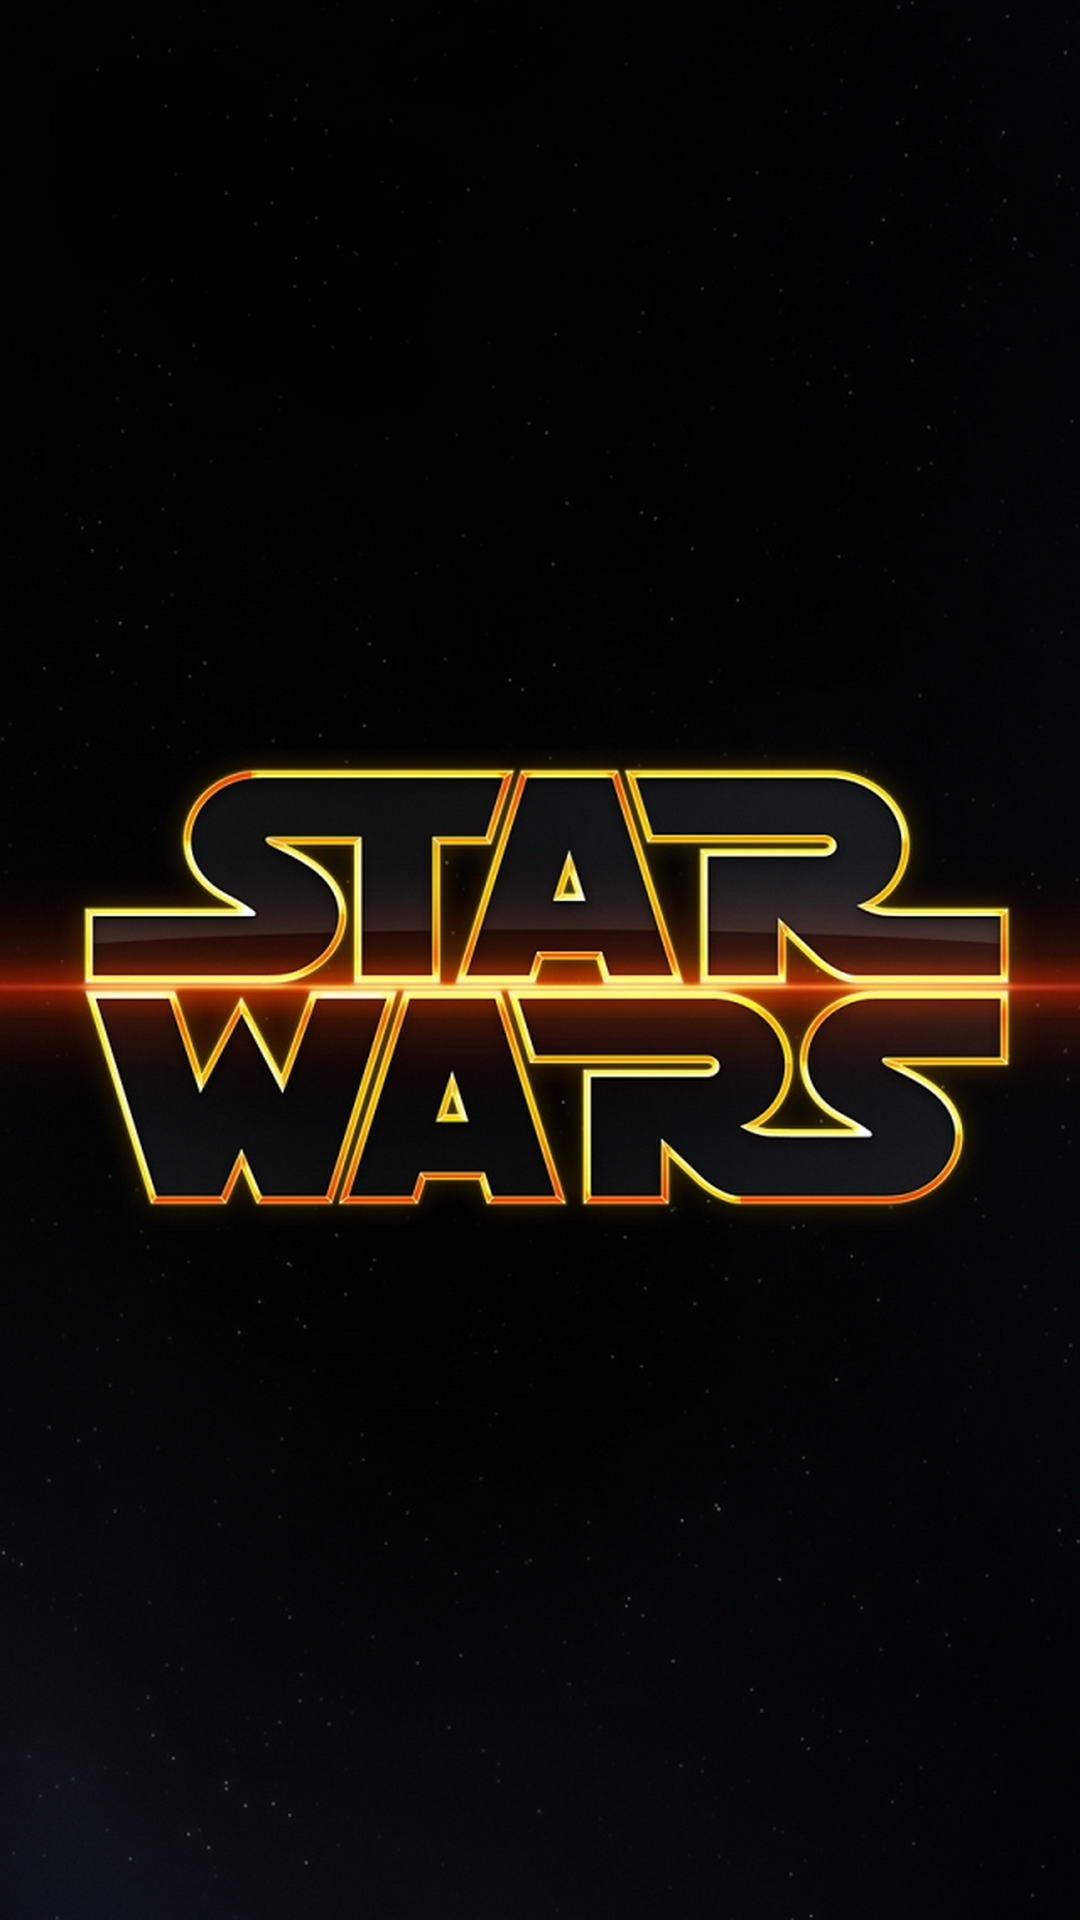 Star wars wallpaper for android androidwalls.org